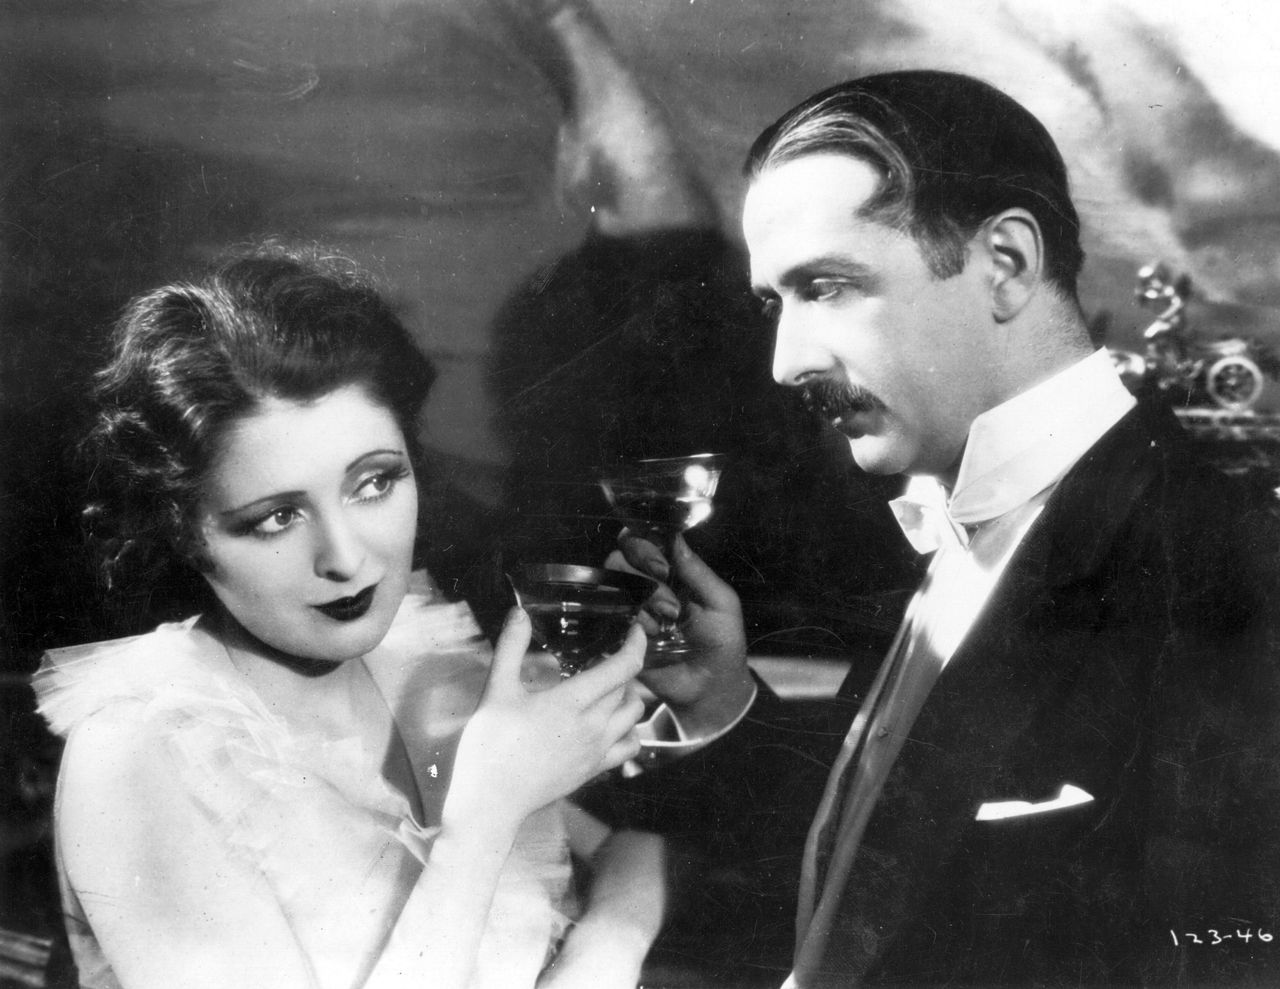 American actress Billie Dove in 1927 drinking champagne in a scene from the film 'American Beauty', directed by Richard Wallace for First National.